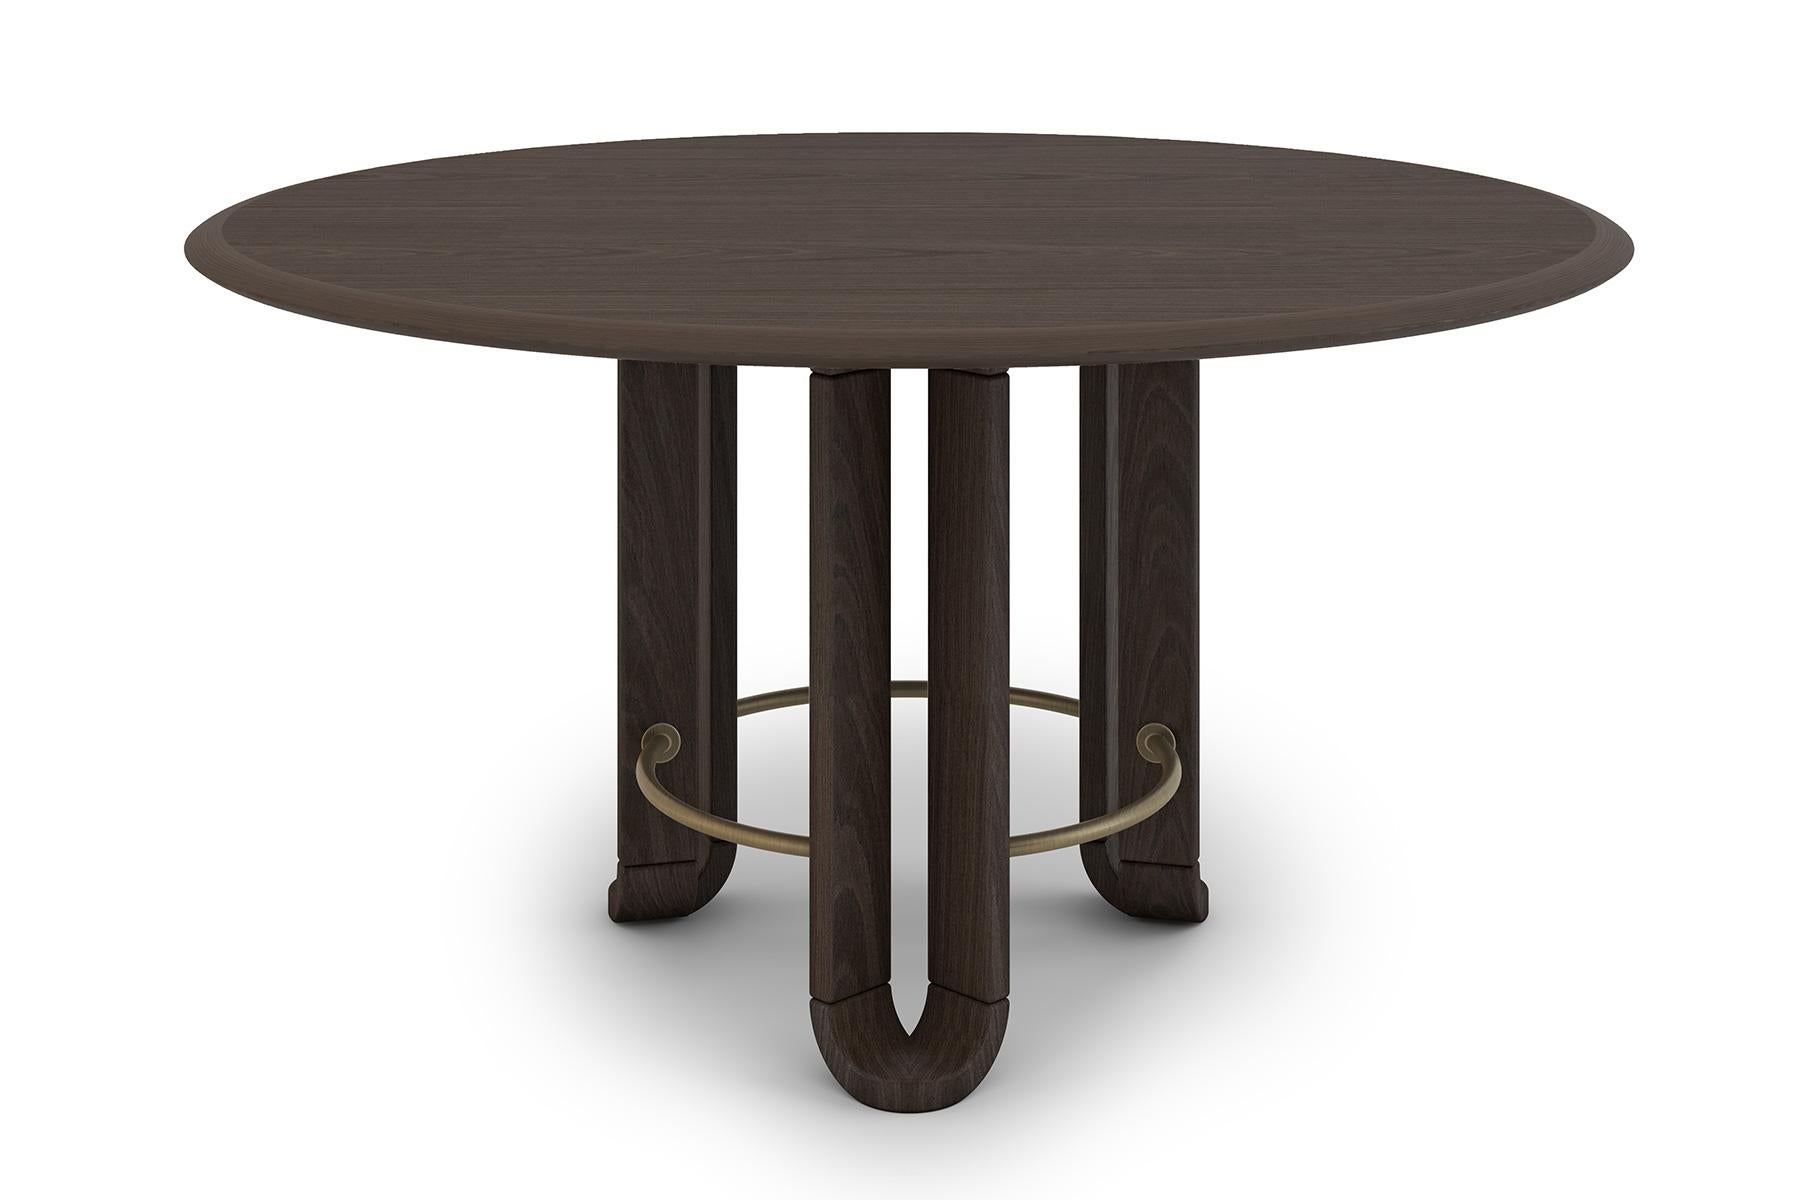 European Dining Table, Round, Walnut with Antique Plated Metal Details For Sale